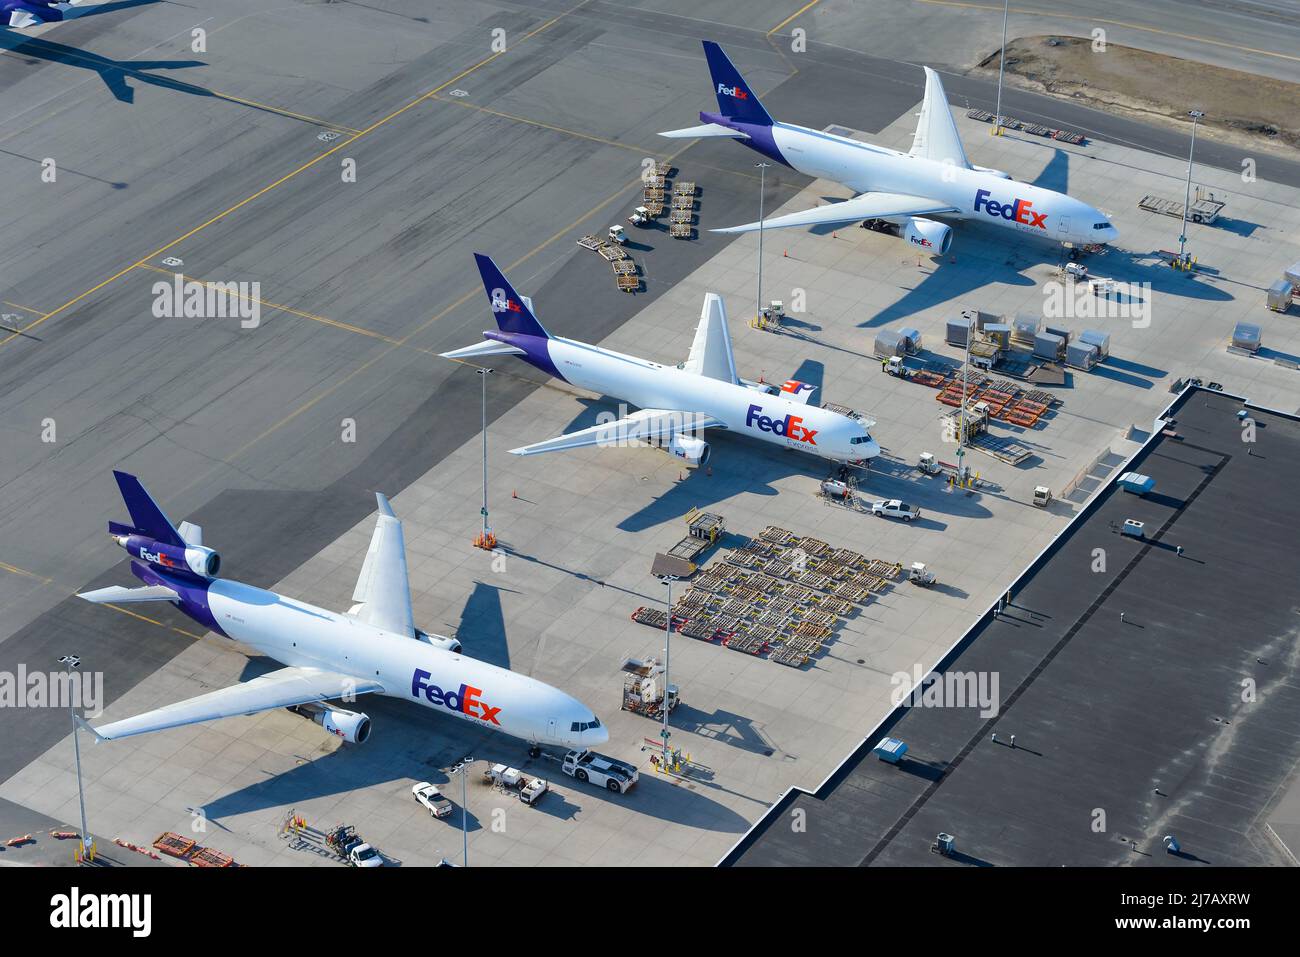 Airplanes of FedEx Cargo at Anchorage Airport, a hub for freight transportation for Federal Express. Line up of freighter aircraft and pallets. Stock Photo